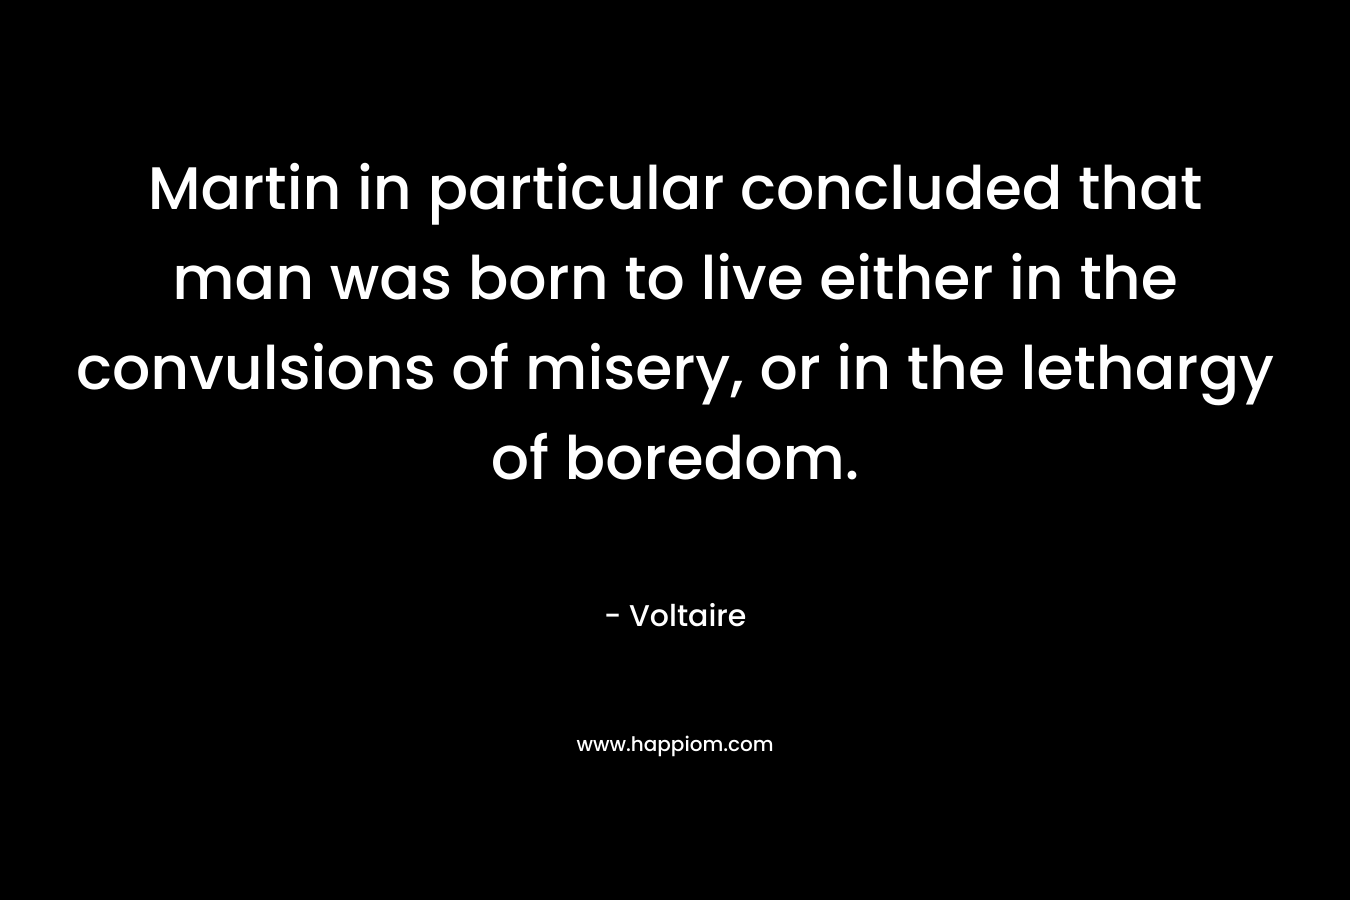 Martin in particular concluded that man was born to live either in the convulsions of misery, or in the lethargy of boredom. – Voltaire